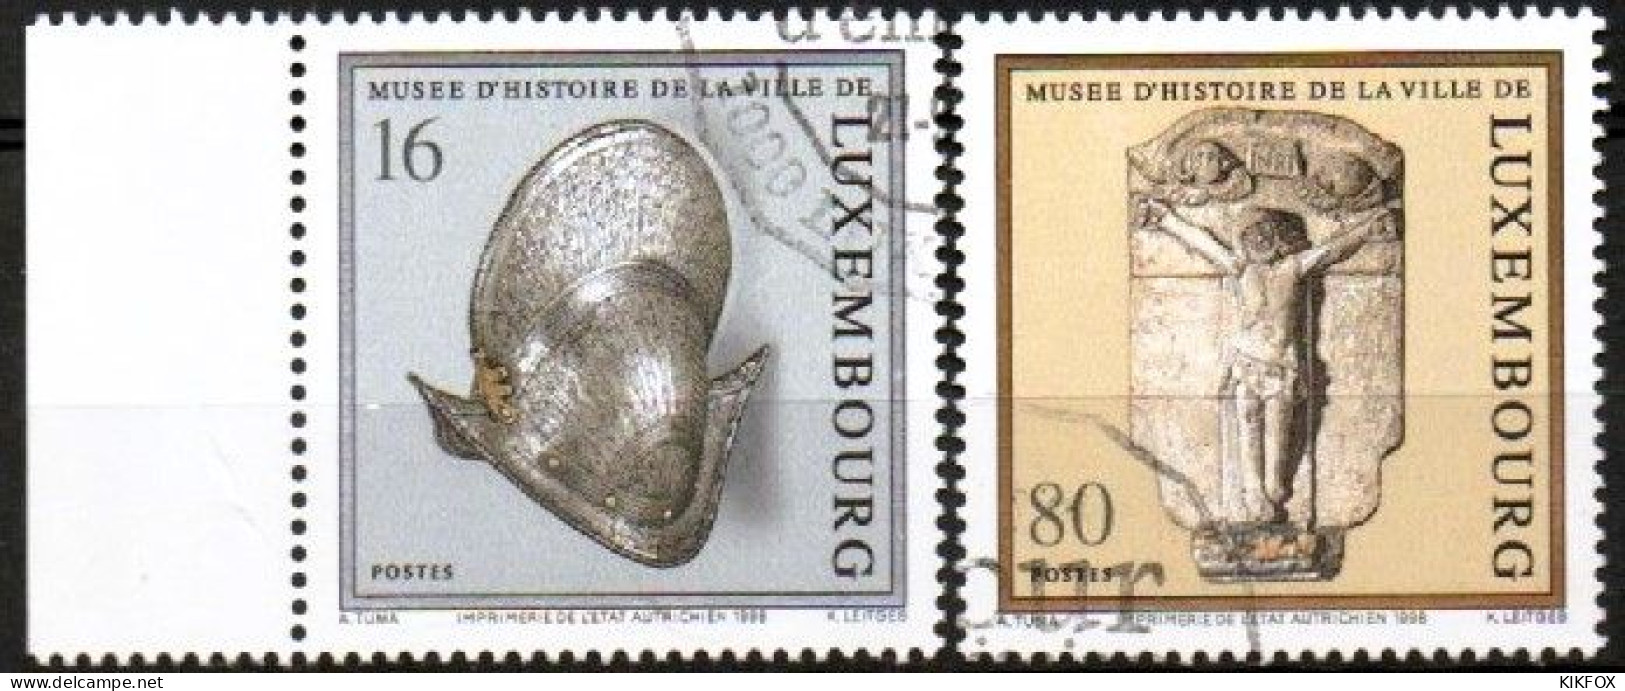 Luxembourg, Luxemburg, 1998, MI 1454 -1455, YT 1404 - 1406,  MUSEES, MUSEEN, , GESTEMPELT,  OBLITERE - Used Stamps